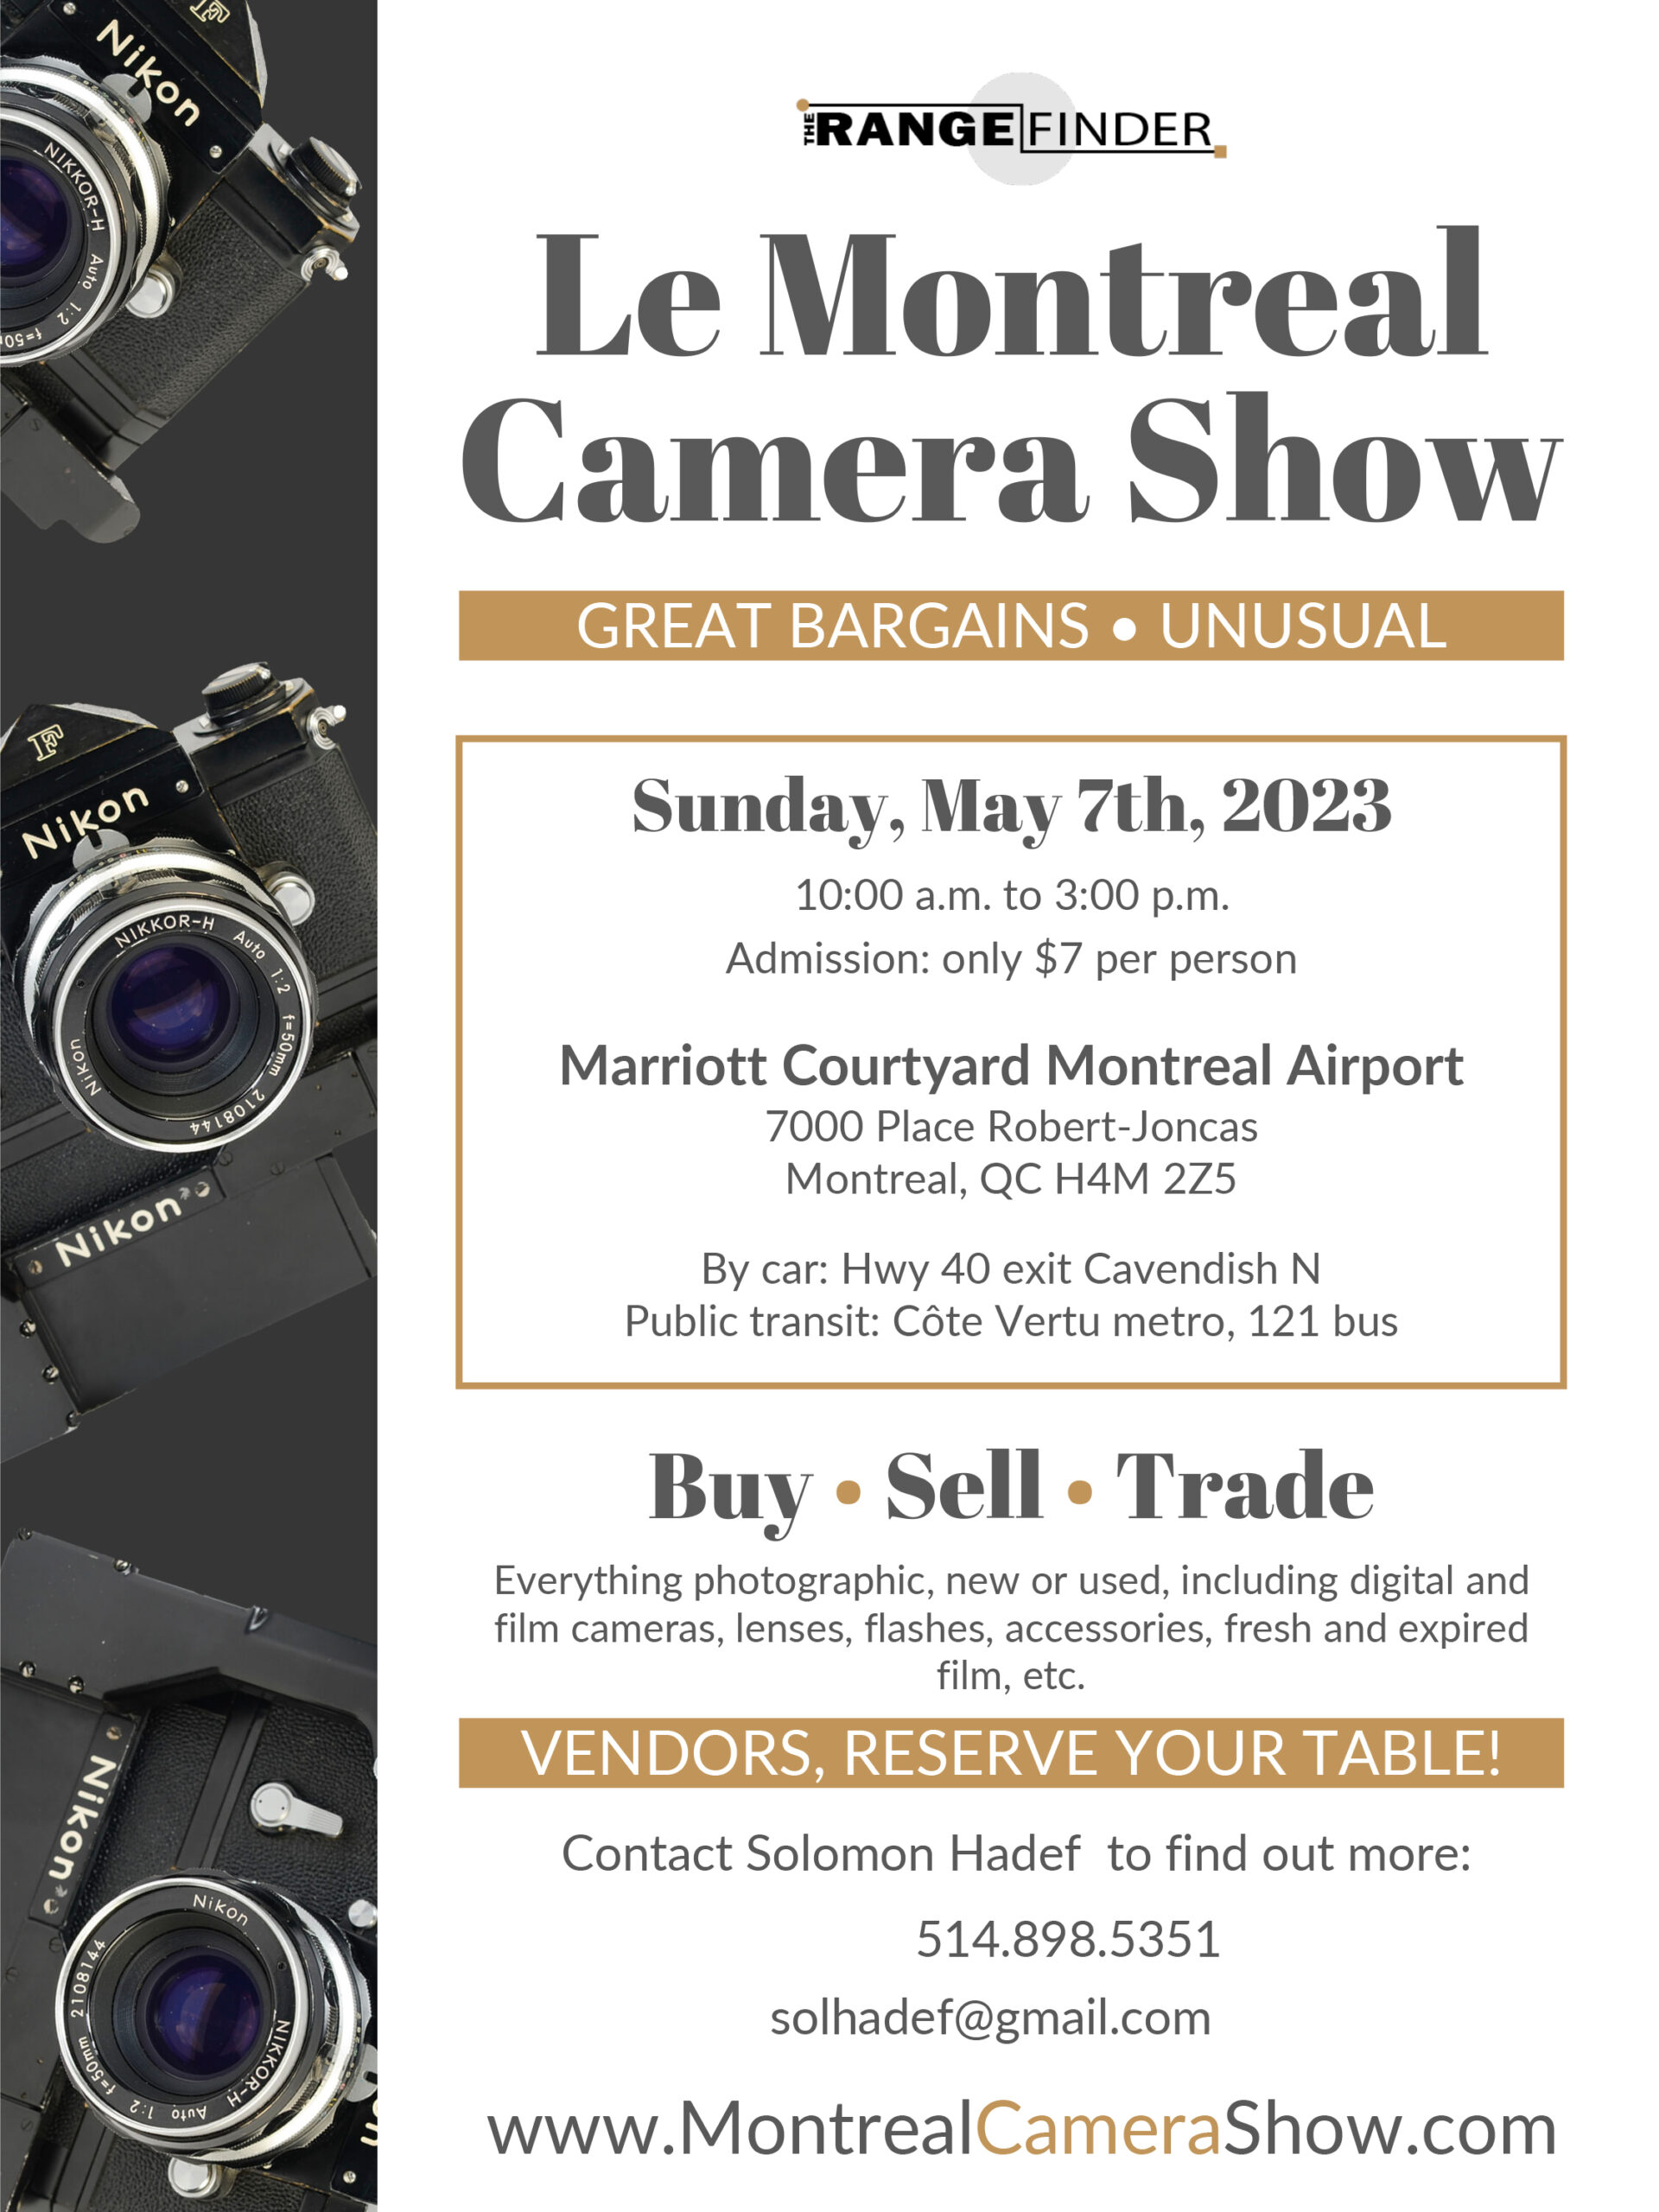 The Montreal Camera Show Flyer